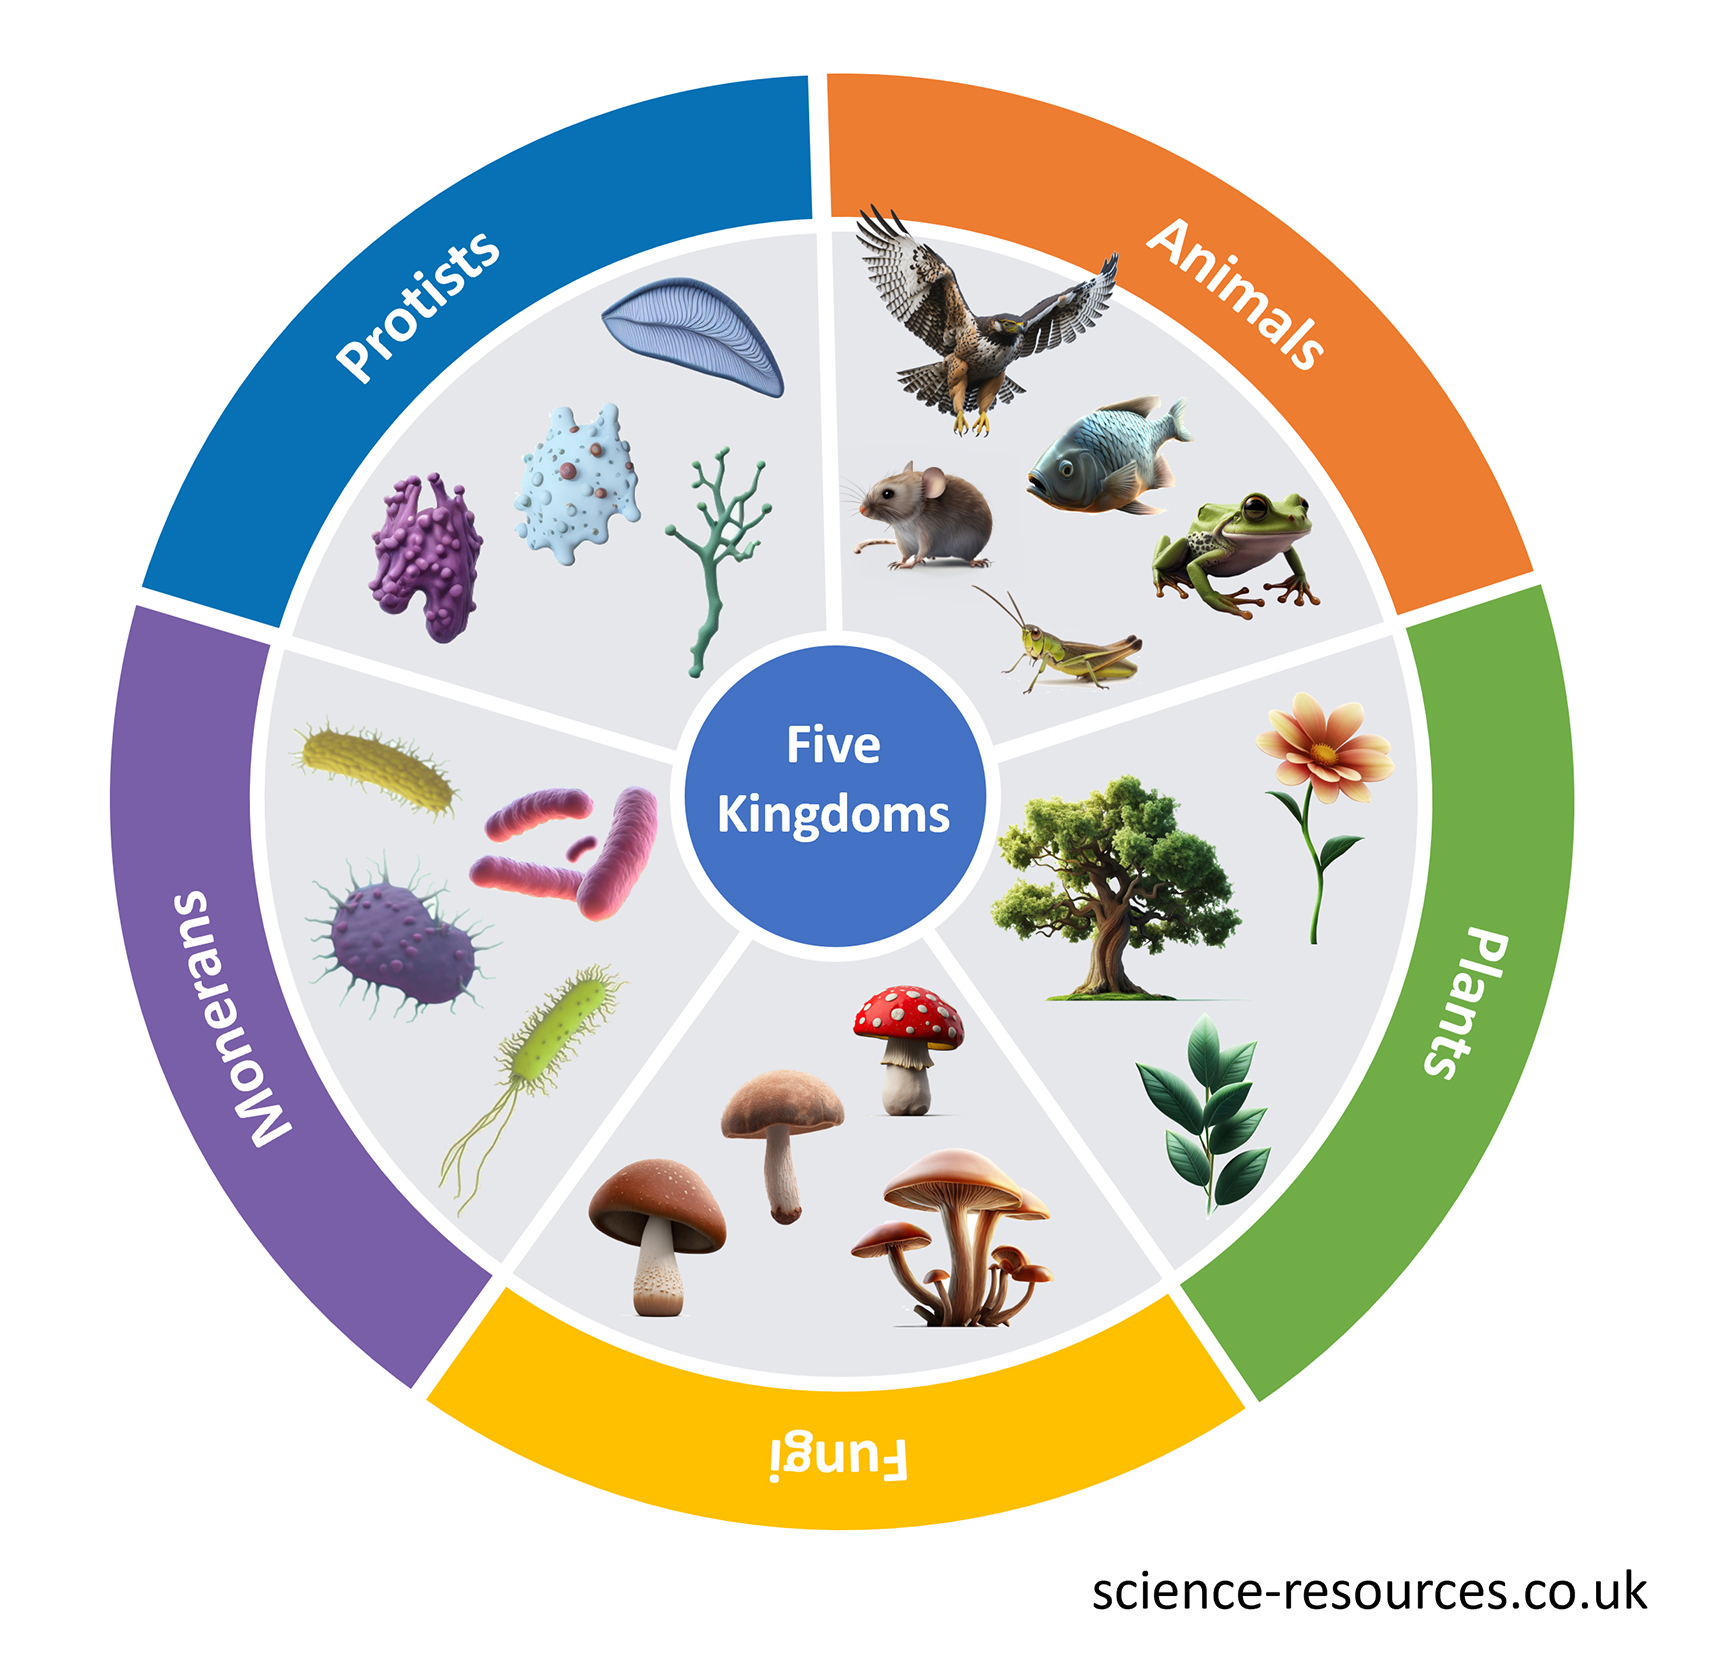 This image is a diagram representing five kingdoms of living organisms. The diagram is divided into coloured segments each representing a different category of living organisms: Protists, Animals, Plants, Fungi, and Monerans. Each segment contains images representative of that category.